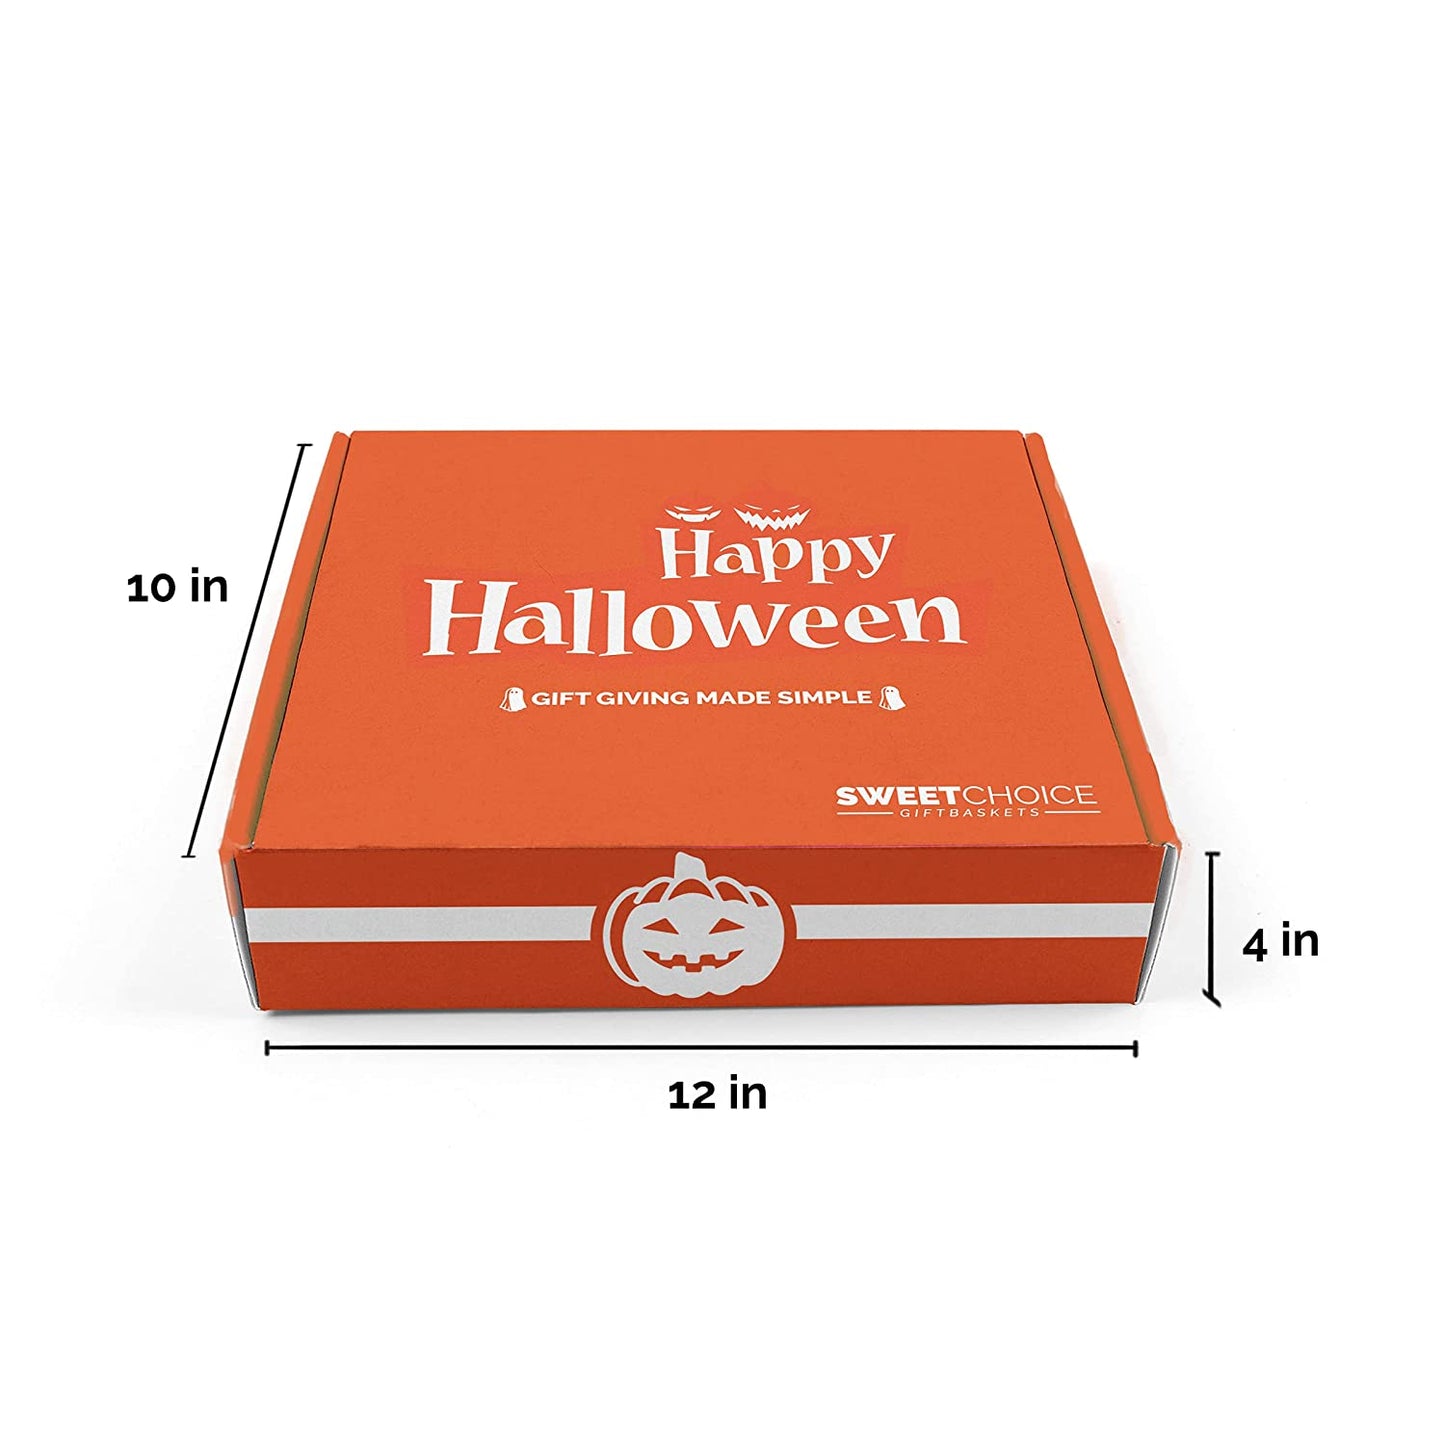 Halloween Care Package Snack box (60) Candy Snacks Assortment Trick or Treat Cookies Food Bars Toys Variety Gift Pack Box Bundle Mixed Bulk Sampler for Children Kids Boys Girls College Students Office